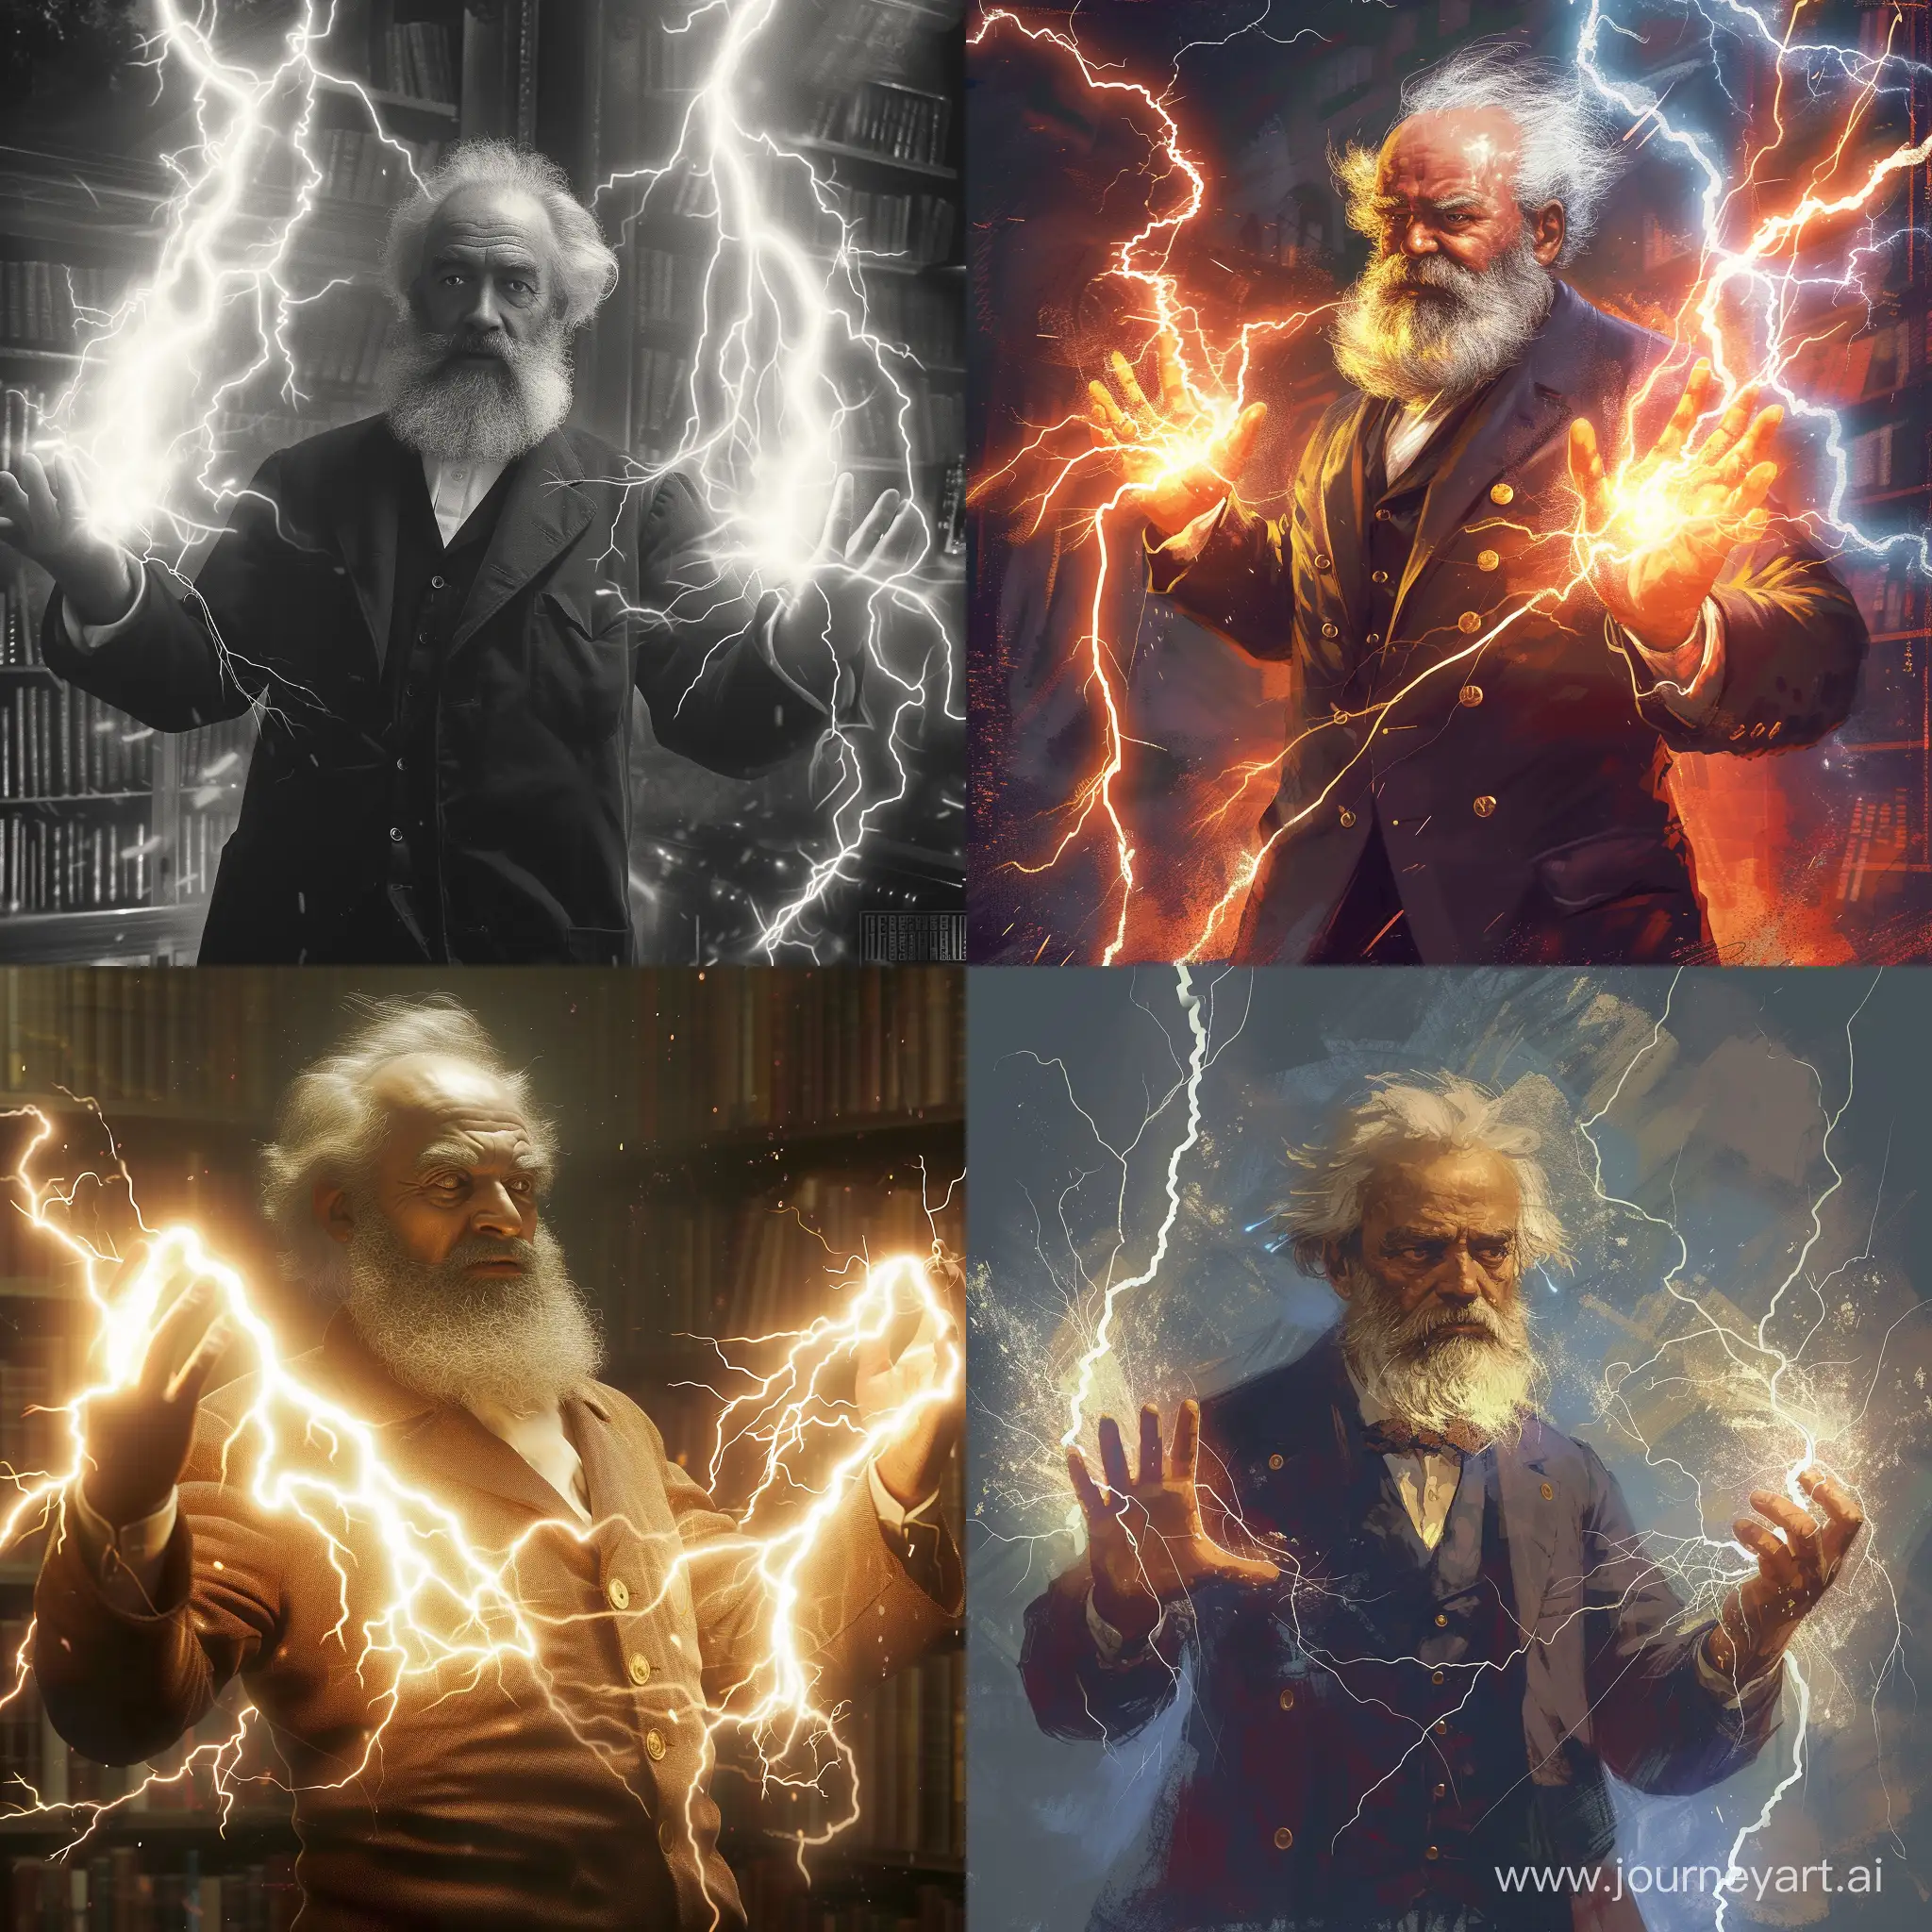 Karl Marx releases lighting bolts for his hands